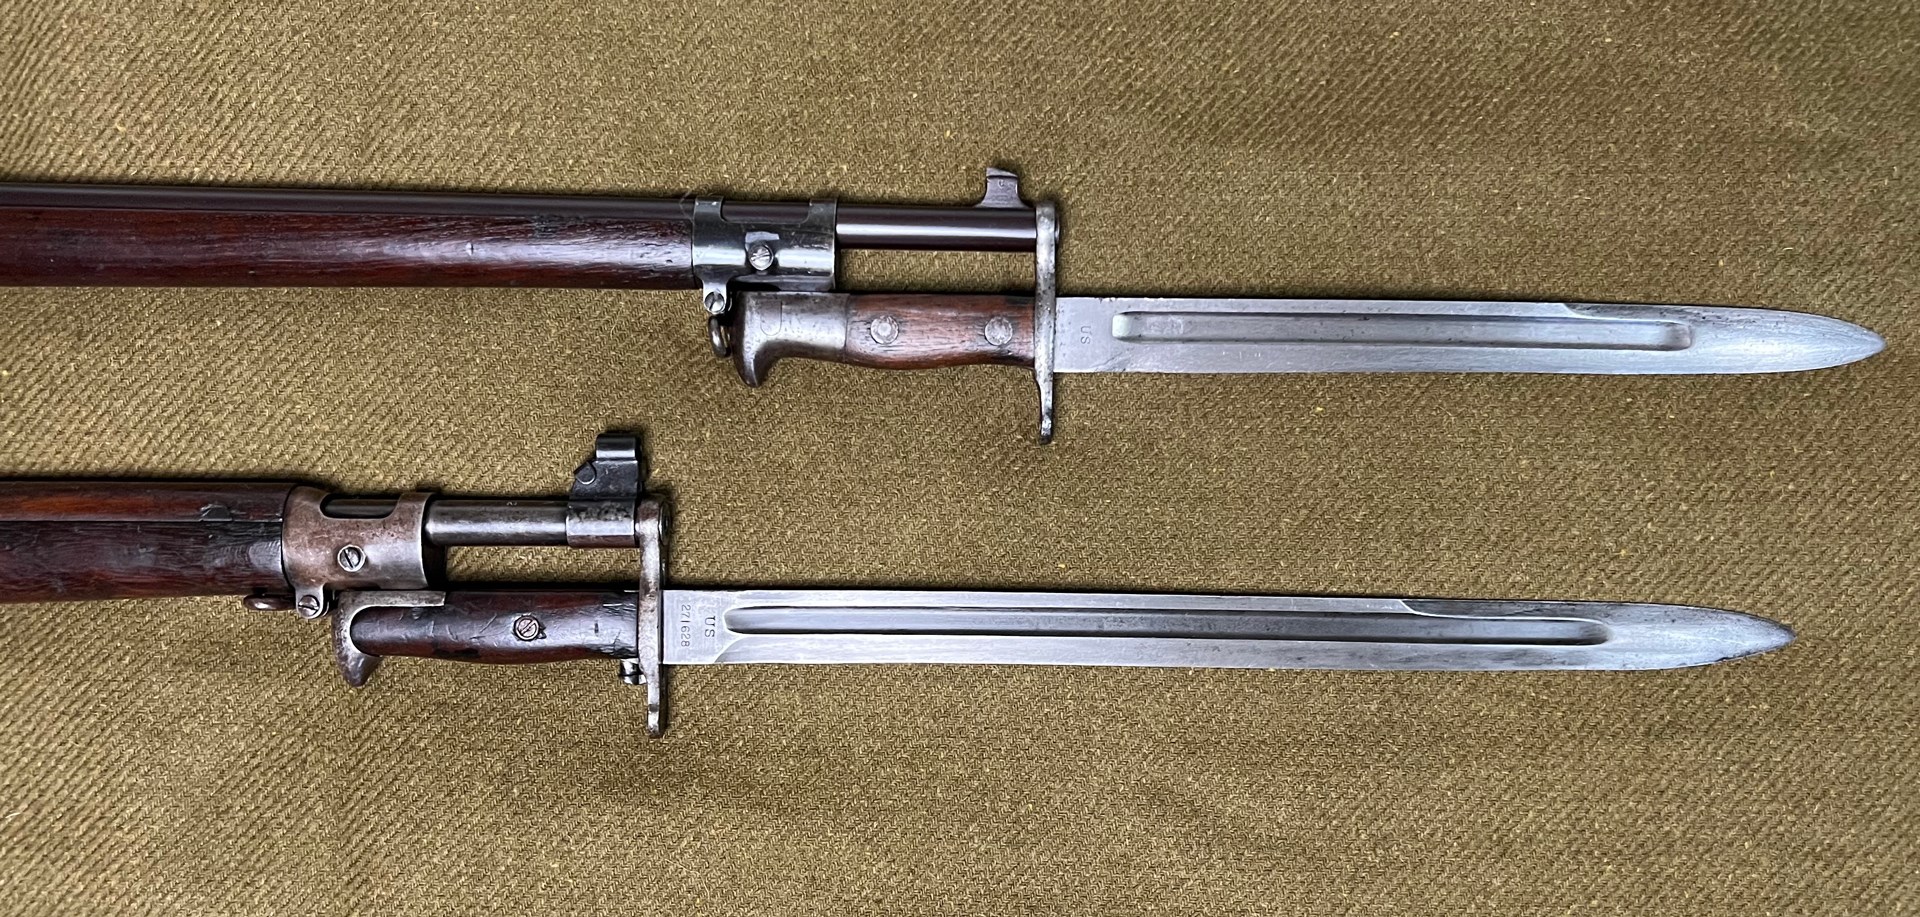 What to do when your standard issued rifle gets shorter? Make the bayonet longer of course! When the M1903 was standardized somewhere between traditional carbine and rifle length, it was decided to make the bayonet longer to make up for the lost reach — believed to be critical in hand to hand fighting.